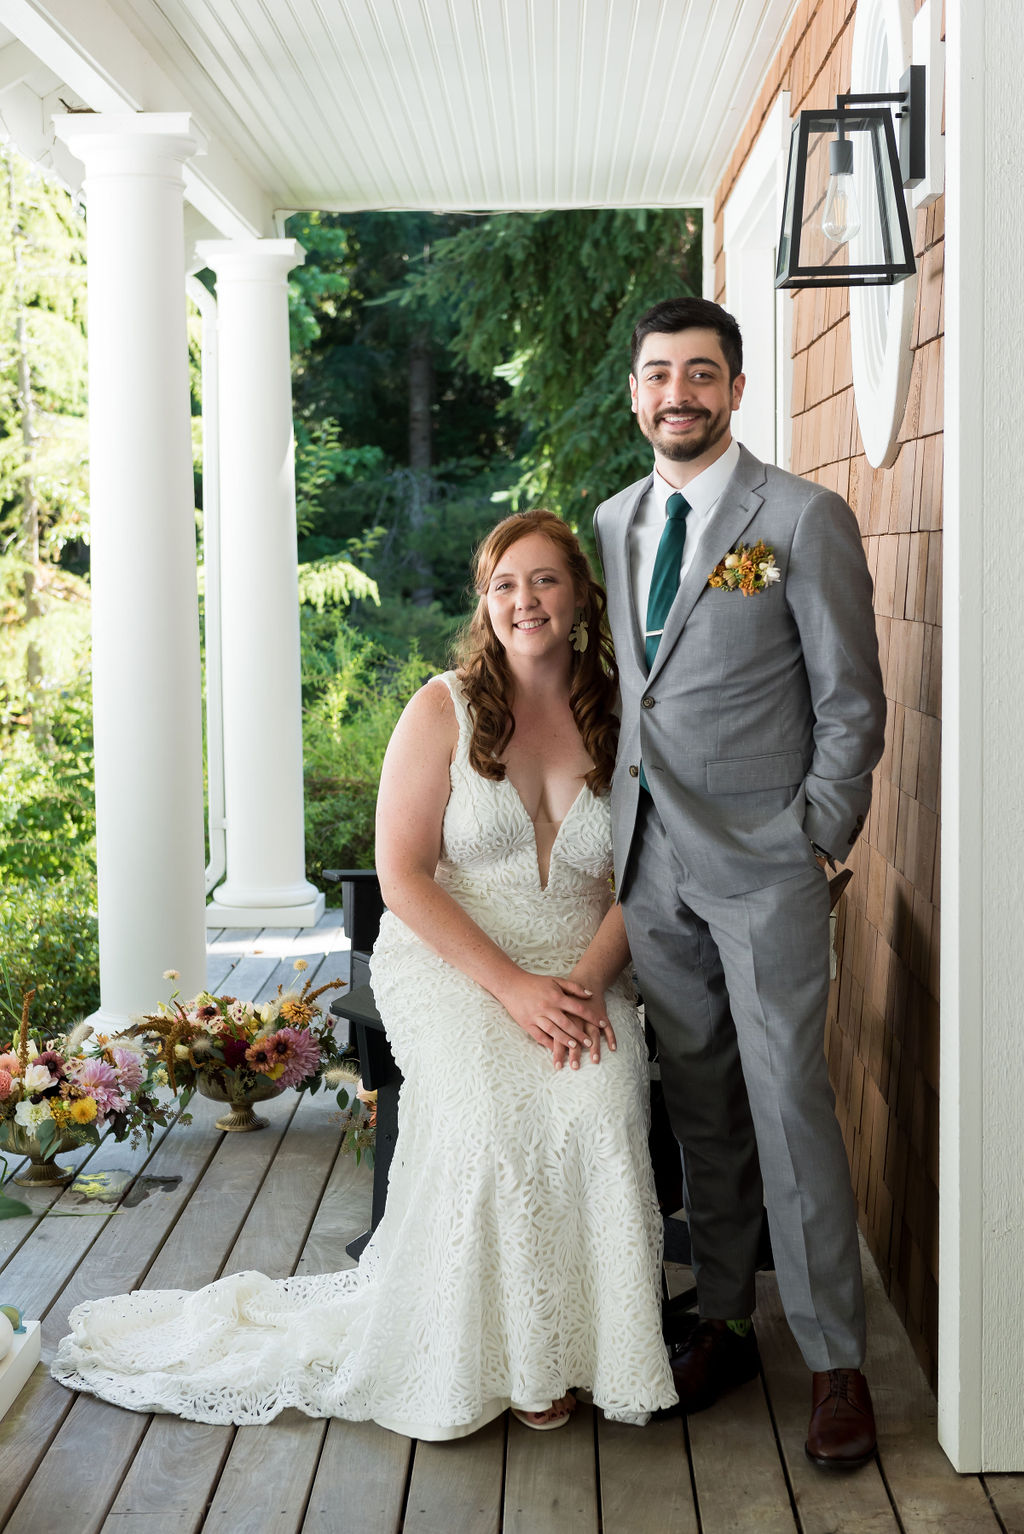 Bride and groom standing on porch